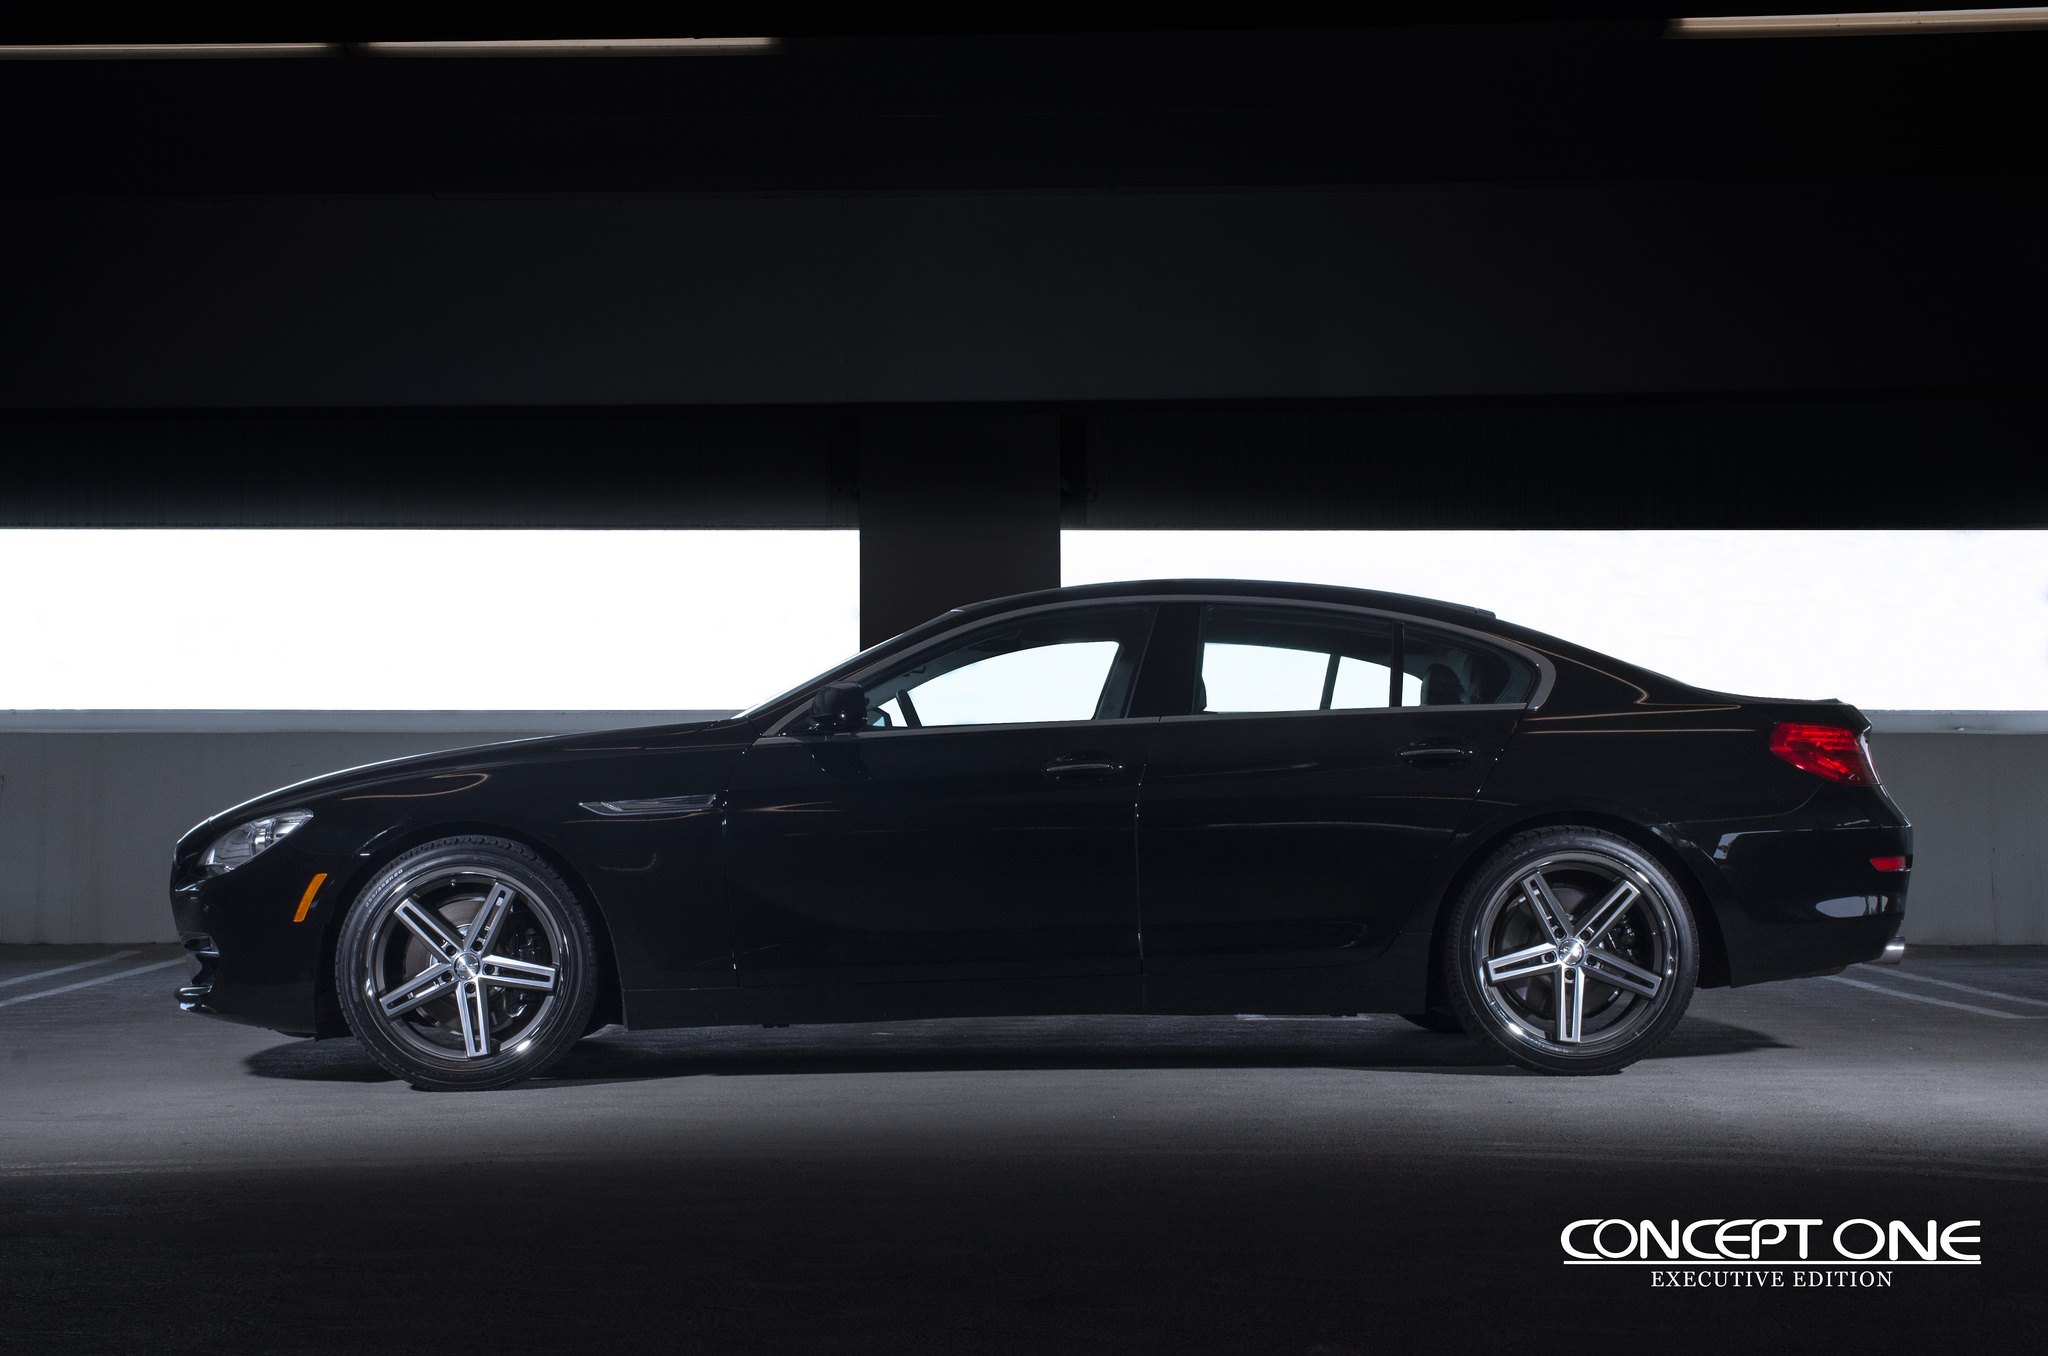 Black BMW 6-Series with Custom Wheels - Photo by Concept One